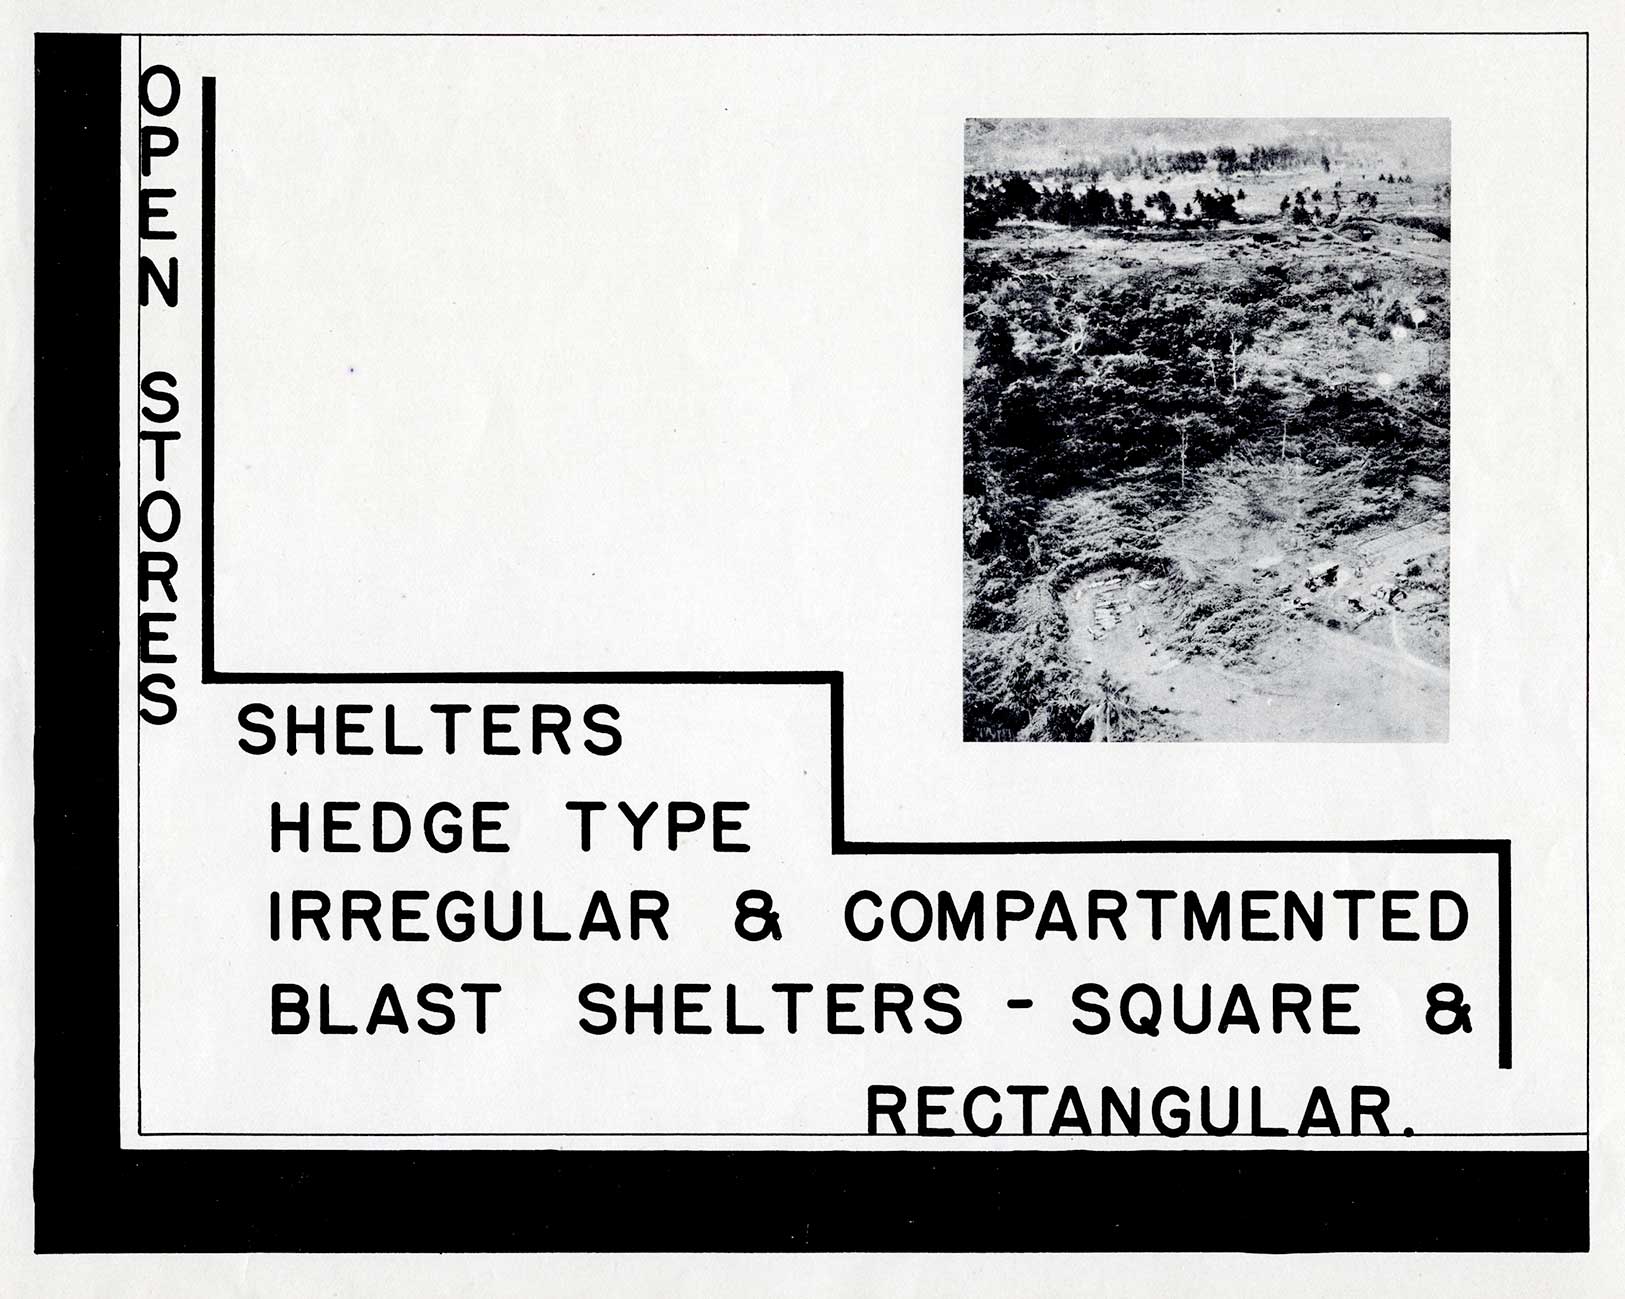 OPEN STORES
SHELTERS
HEDGE TYPE
IRREGULAR and COMPARTMENTED
BLAST SHELTERS - SQUARE and
RECTANGULAR. 